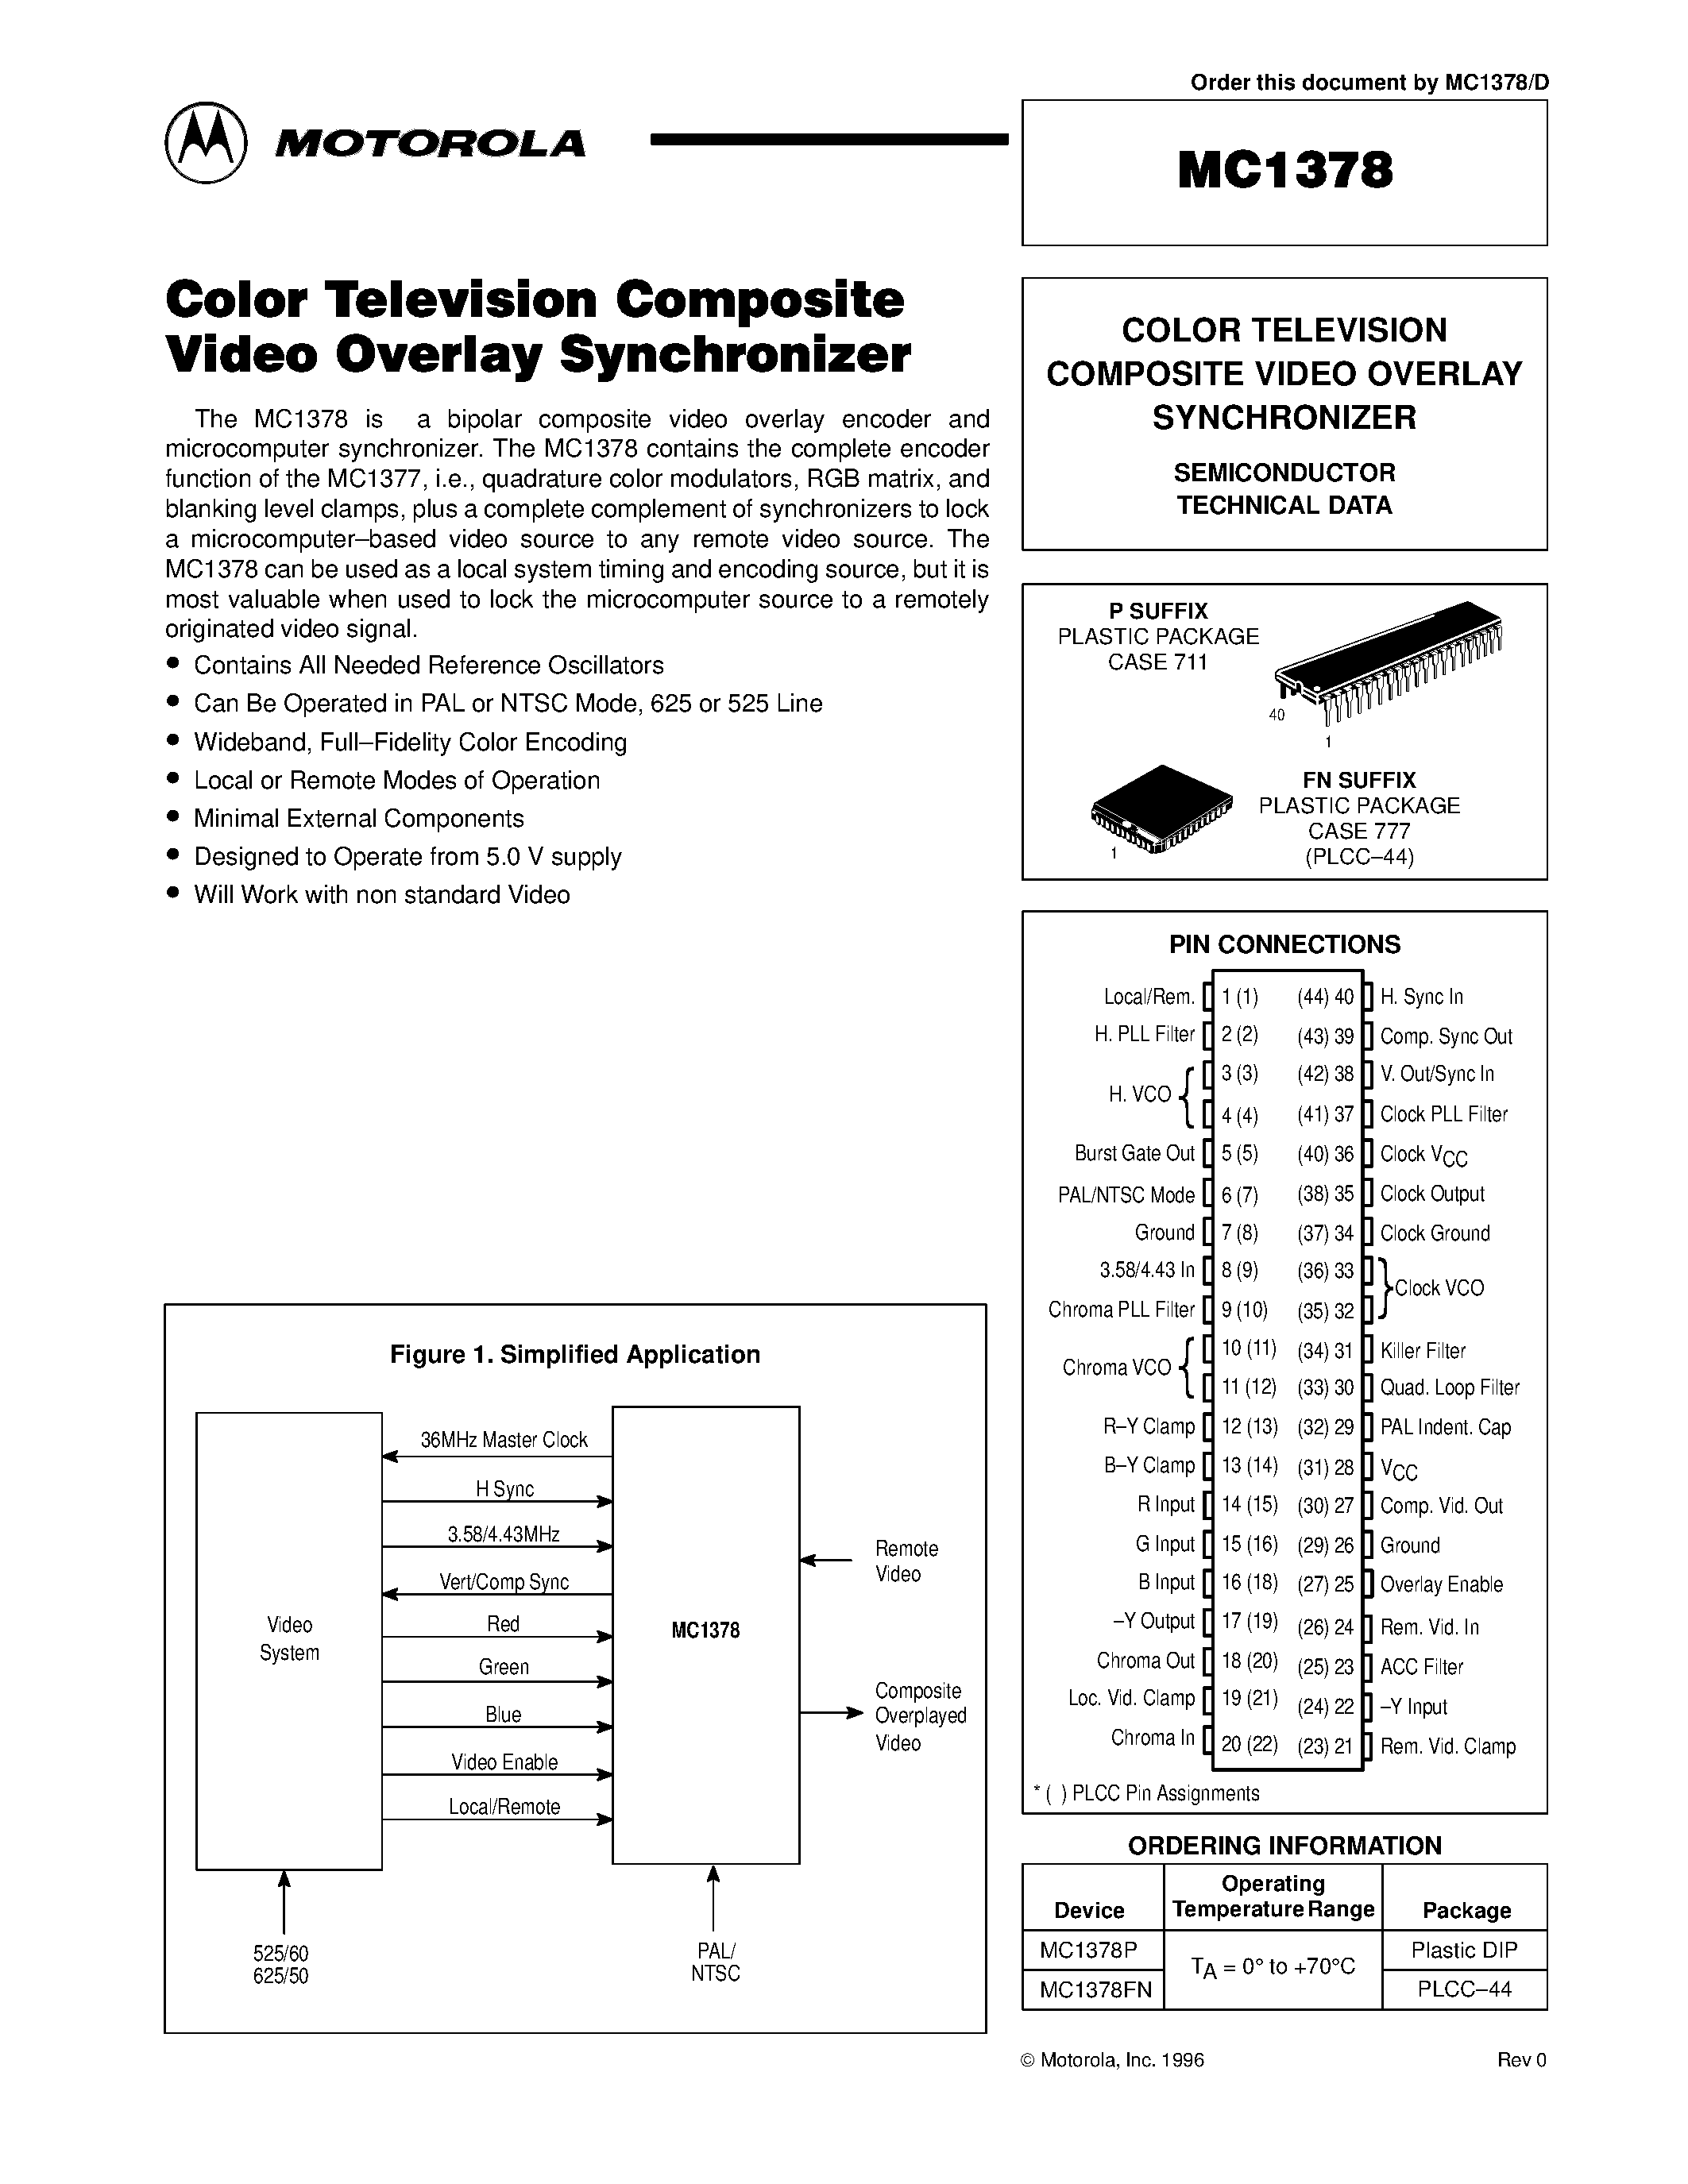 Даташит MC1378FN - COLOR TELEVISION COMPOSITE VIDEO OVERLAY SYNCHRONIZER страница 1